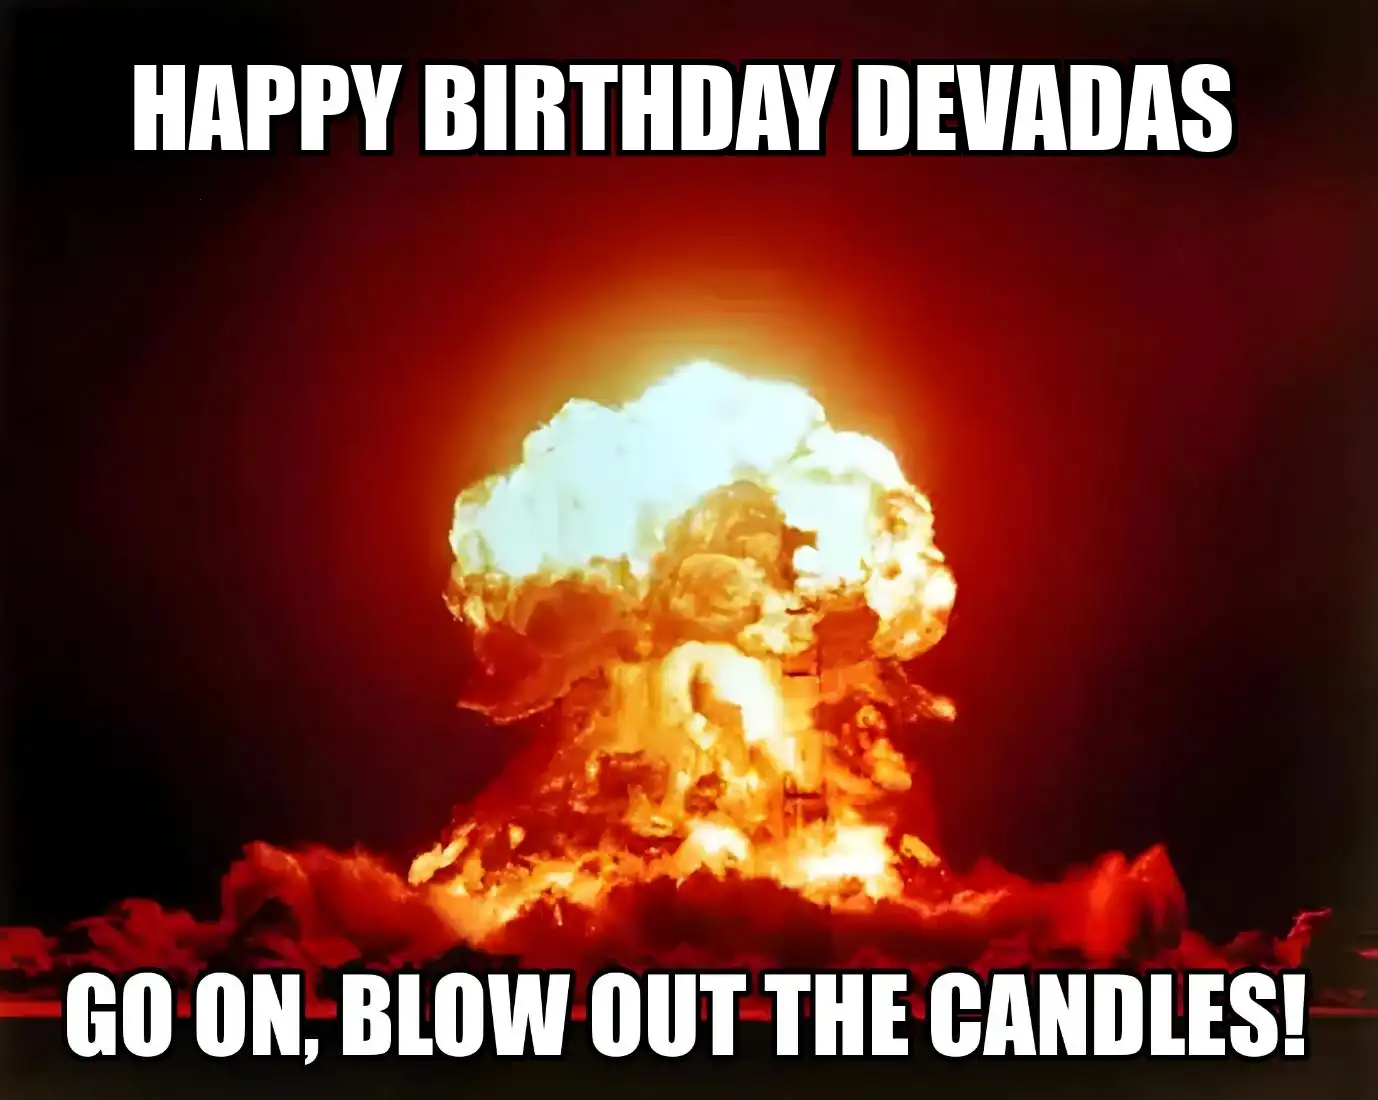 Happy Birthday Devadas Go On Blow Out The Candles Meme